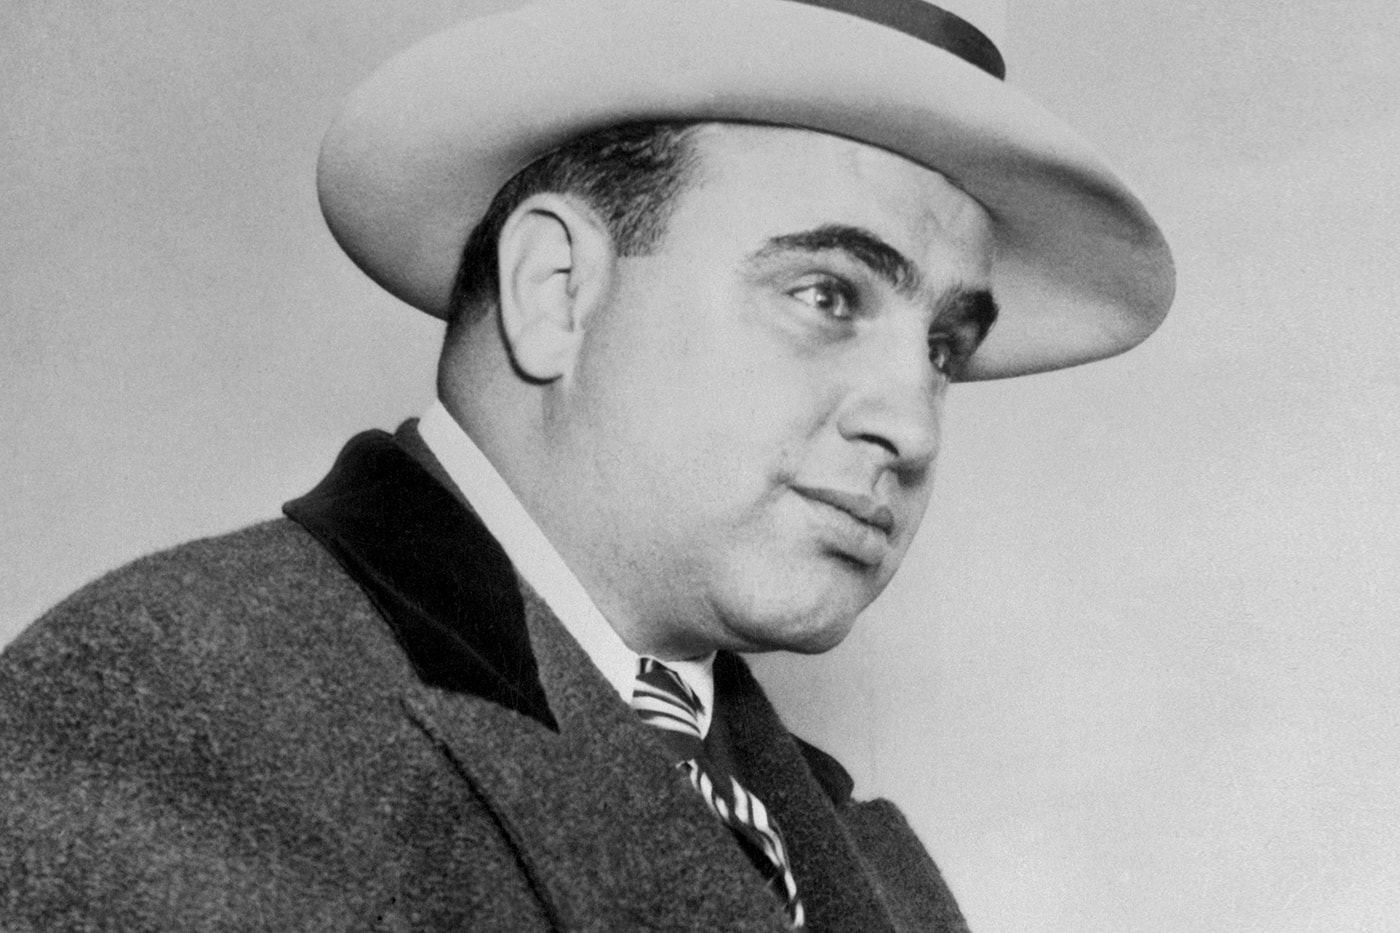 Al Capone Estate Personal Items Witherell’s Auction House info A Century of Notoriety